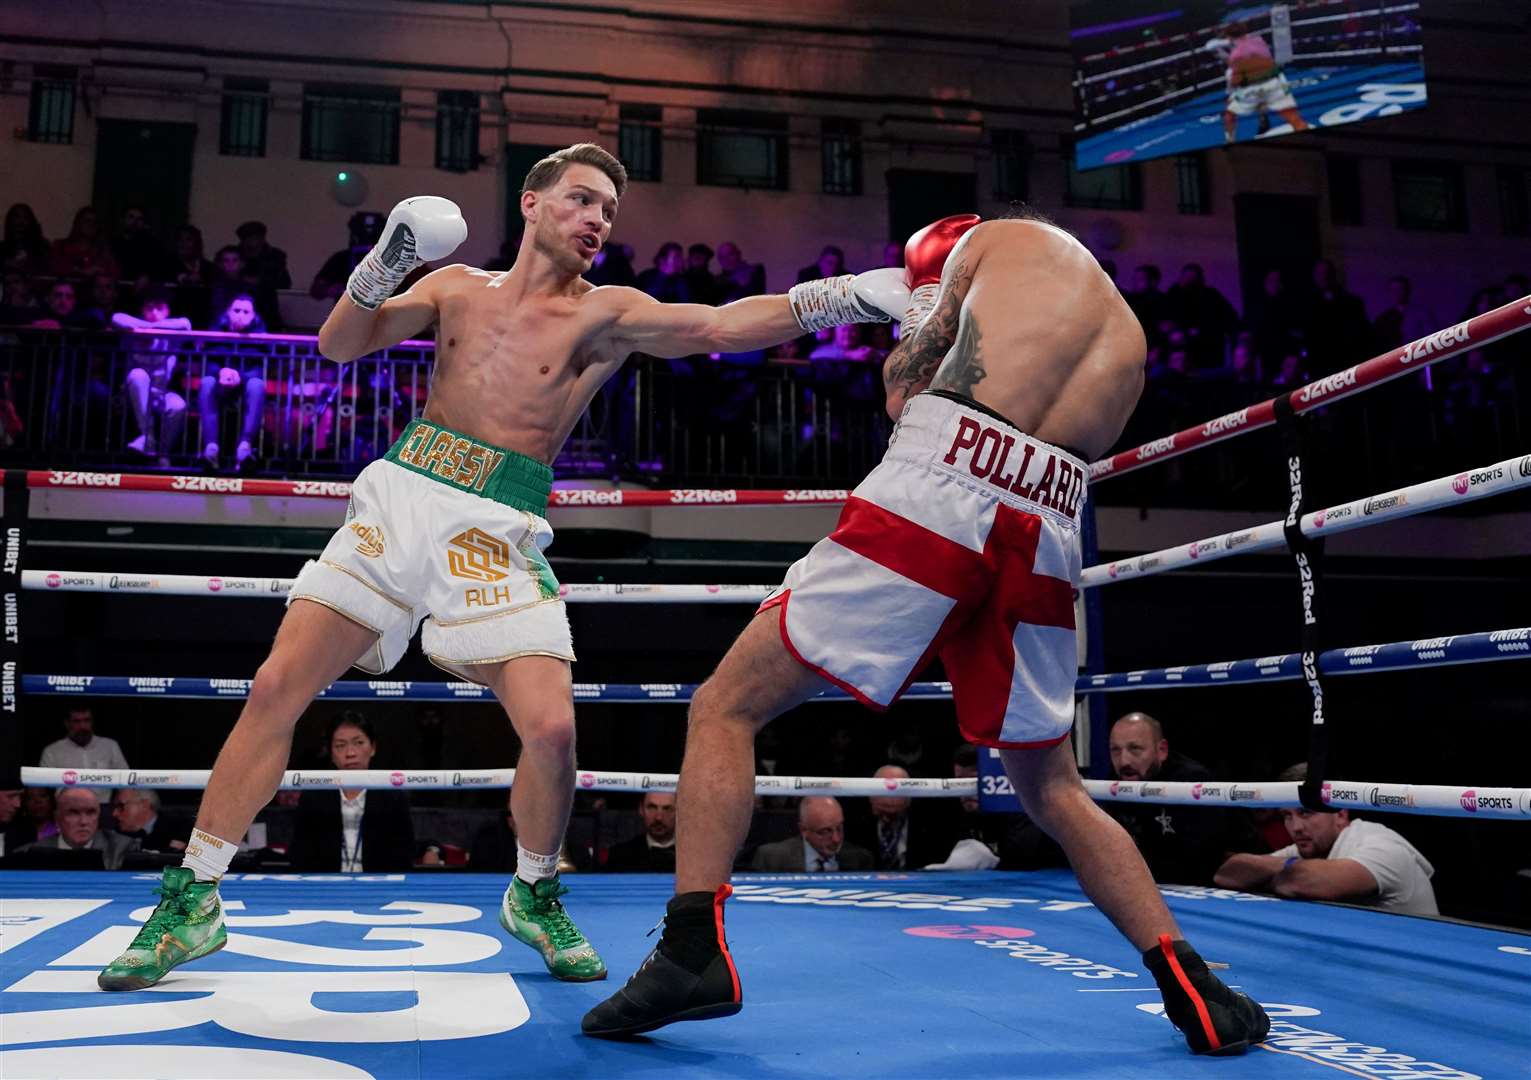 Charlie Hickford on his way to winning at York Hall on his professional debut against Jake Pollard Picture: Stephen Dunkley / Queensbury Promotions